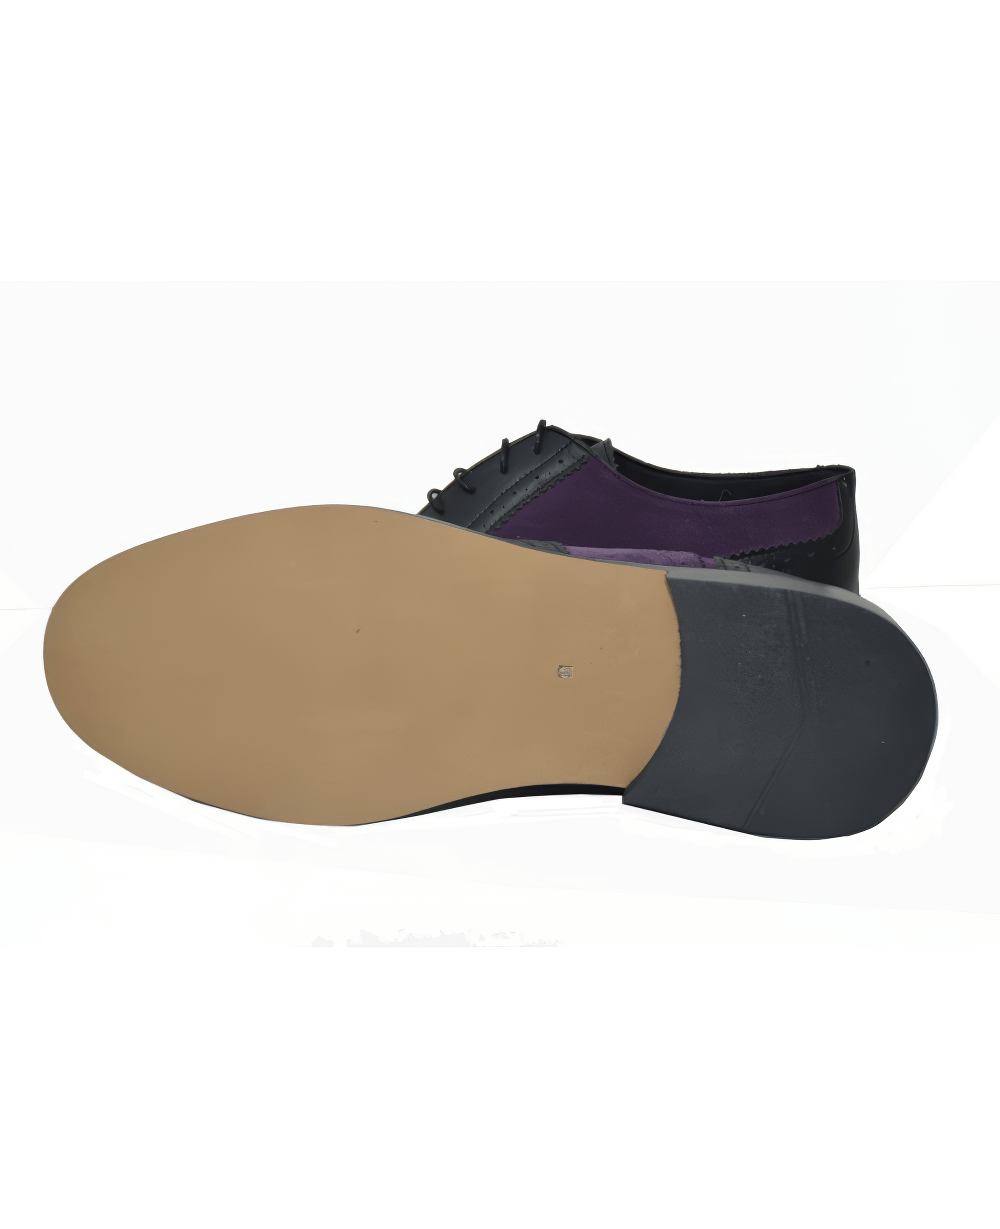 Men's Suede and Grained Leather Oxford Footwear